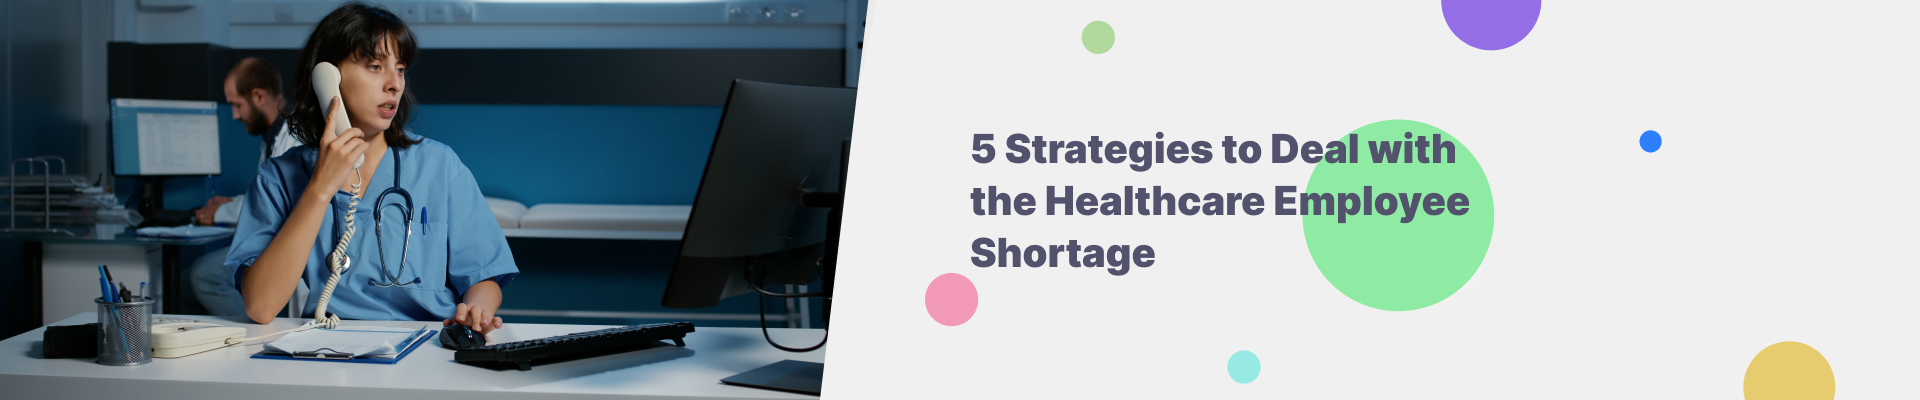 5 Strategies to Deal with the Healthcare Employee Shortage